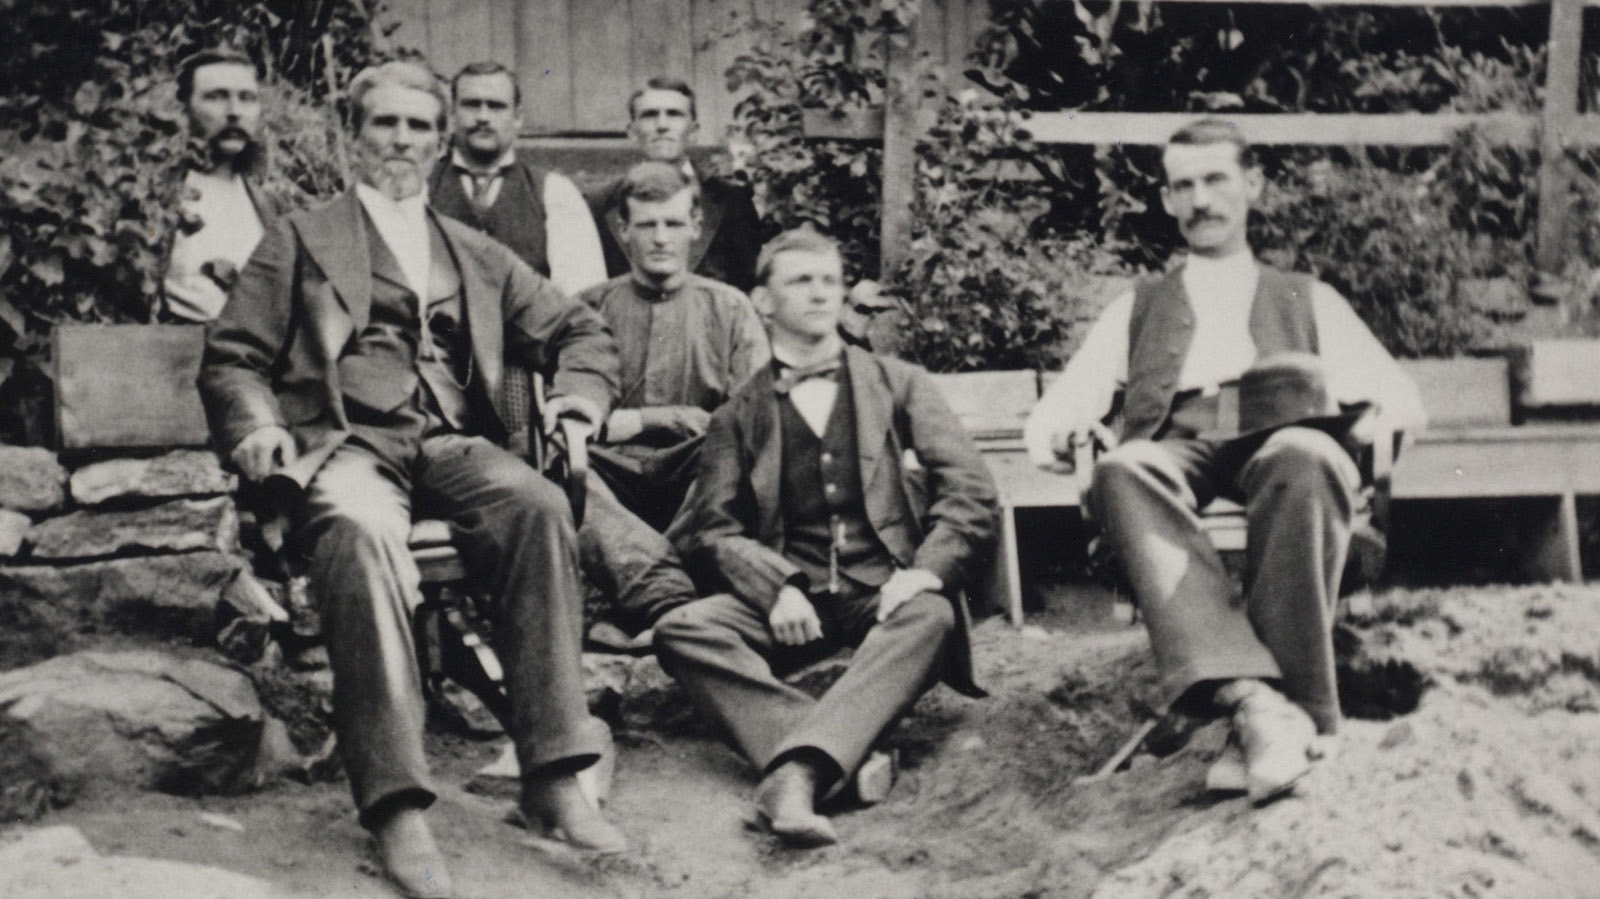 Albert J. Bothwell, front left, with family and friends.